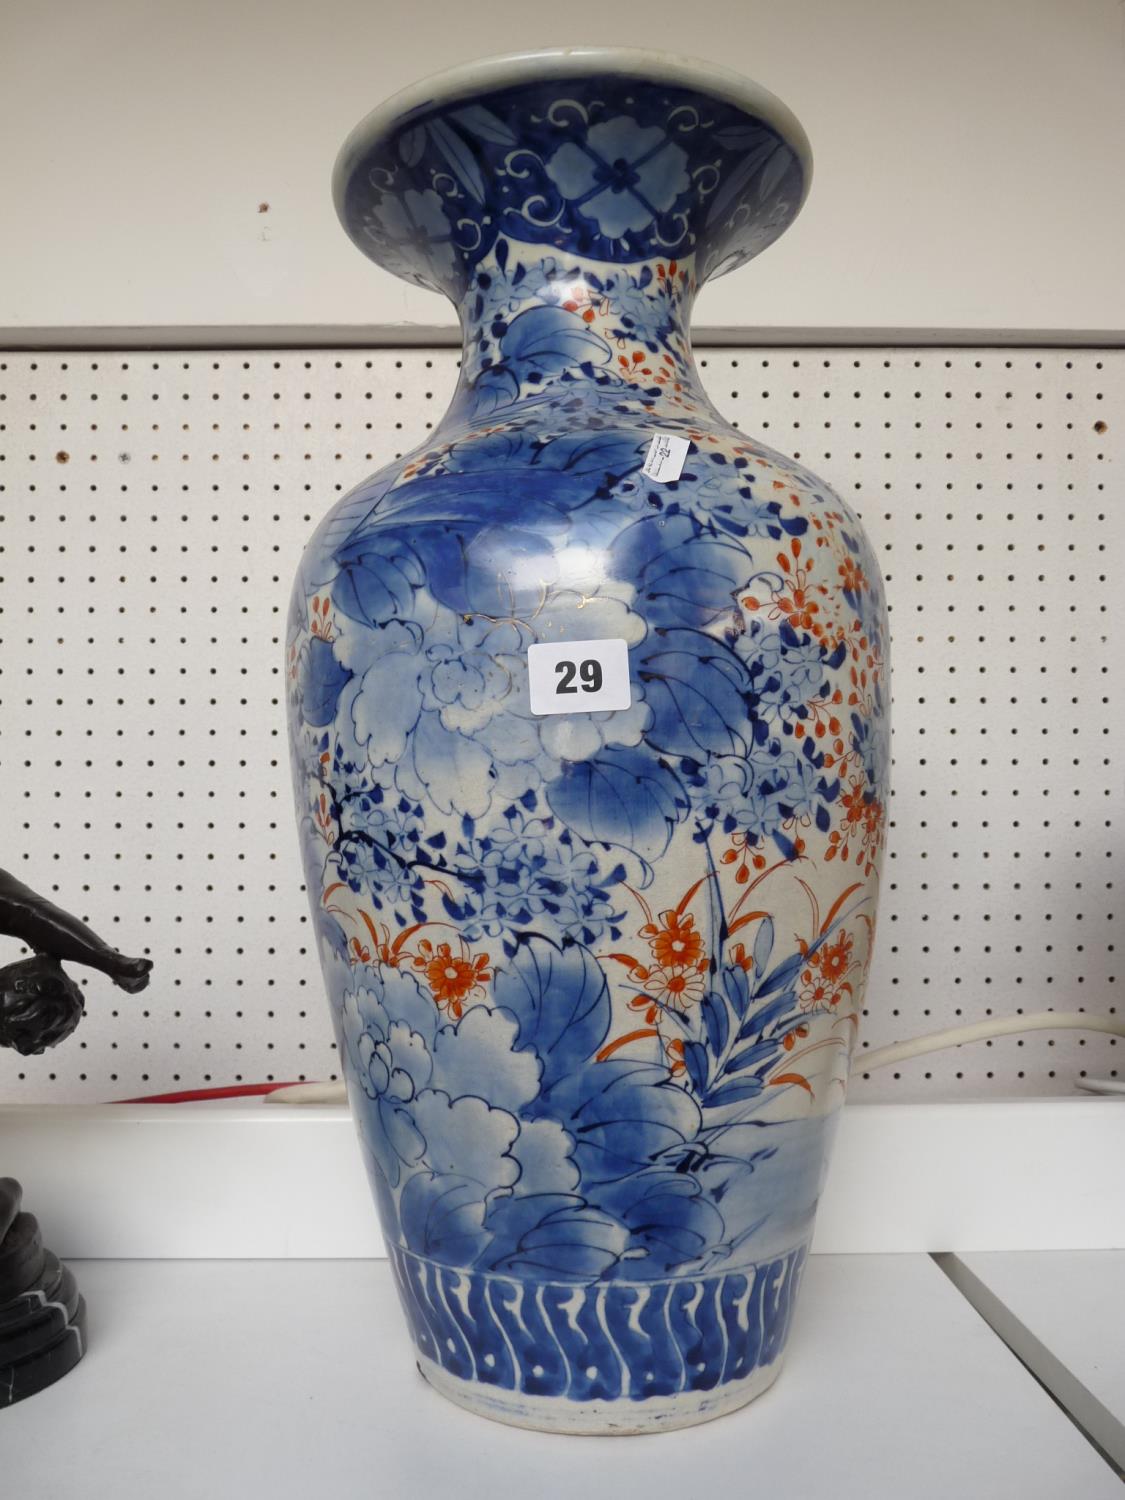 Large Chinese Qing Dynasty vase with Blue & White and Polychrome floral decoration. 48cm in Height.